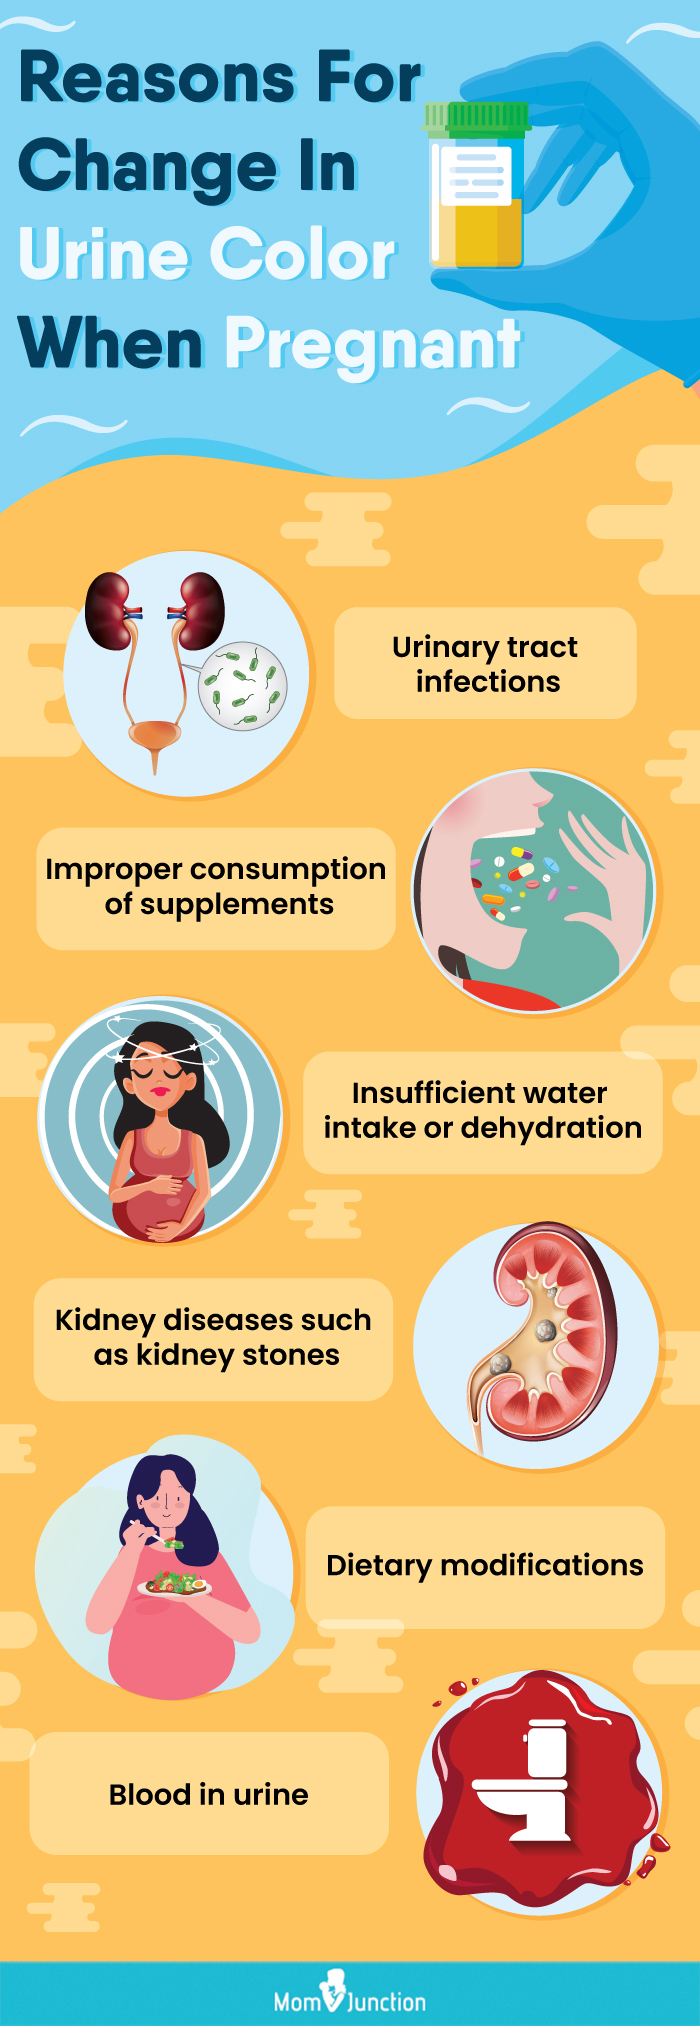 Leukocytes In Urine During Pregnancy: Causes And Treatment